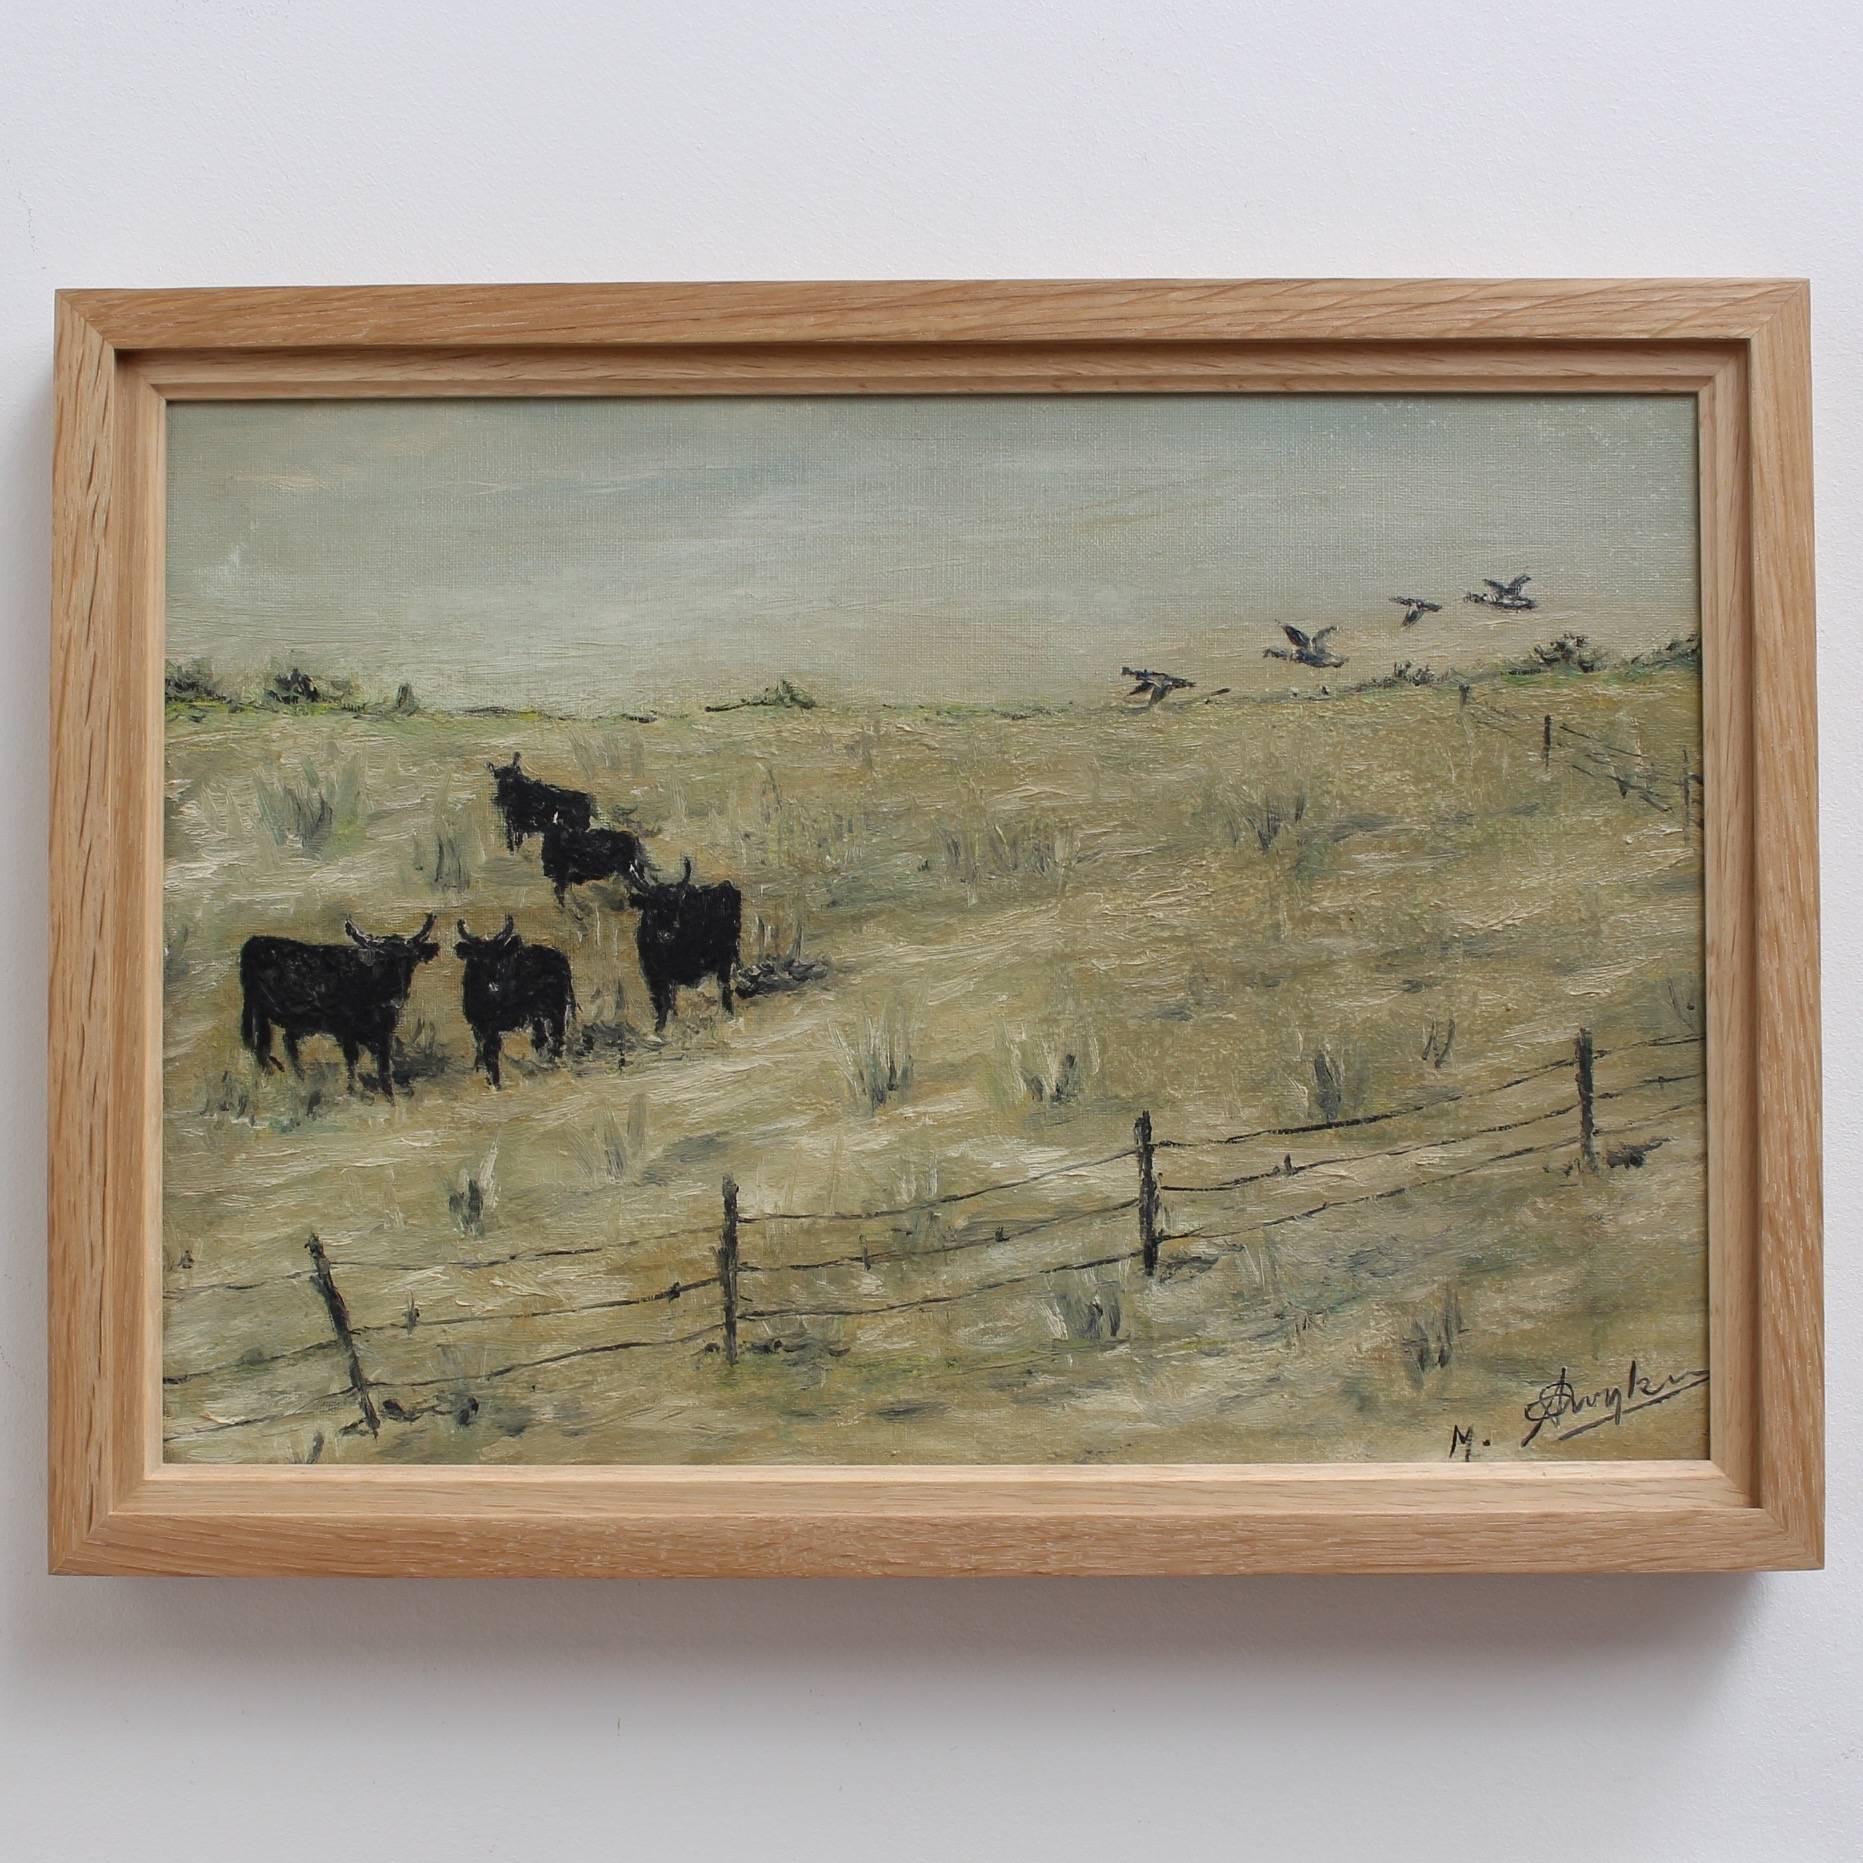 'Grazing Bulls in the Camargue' by M. Arvanitakis, Mid-Century Oil Landscape  1